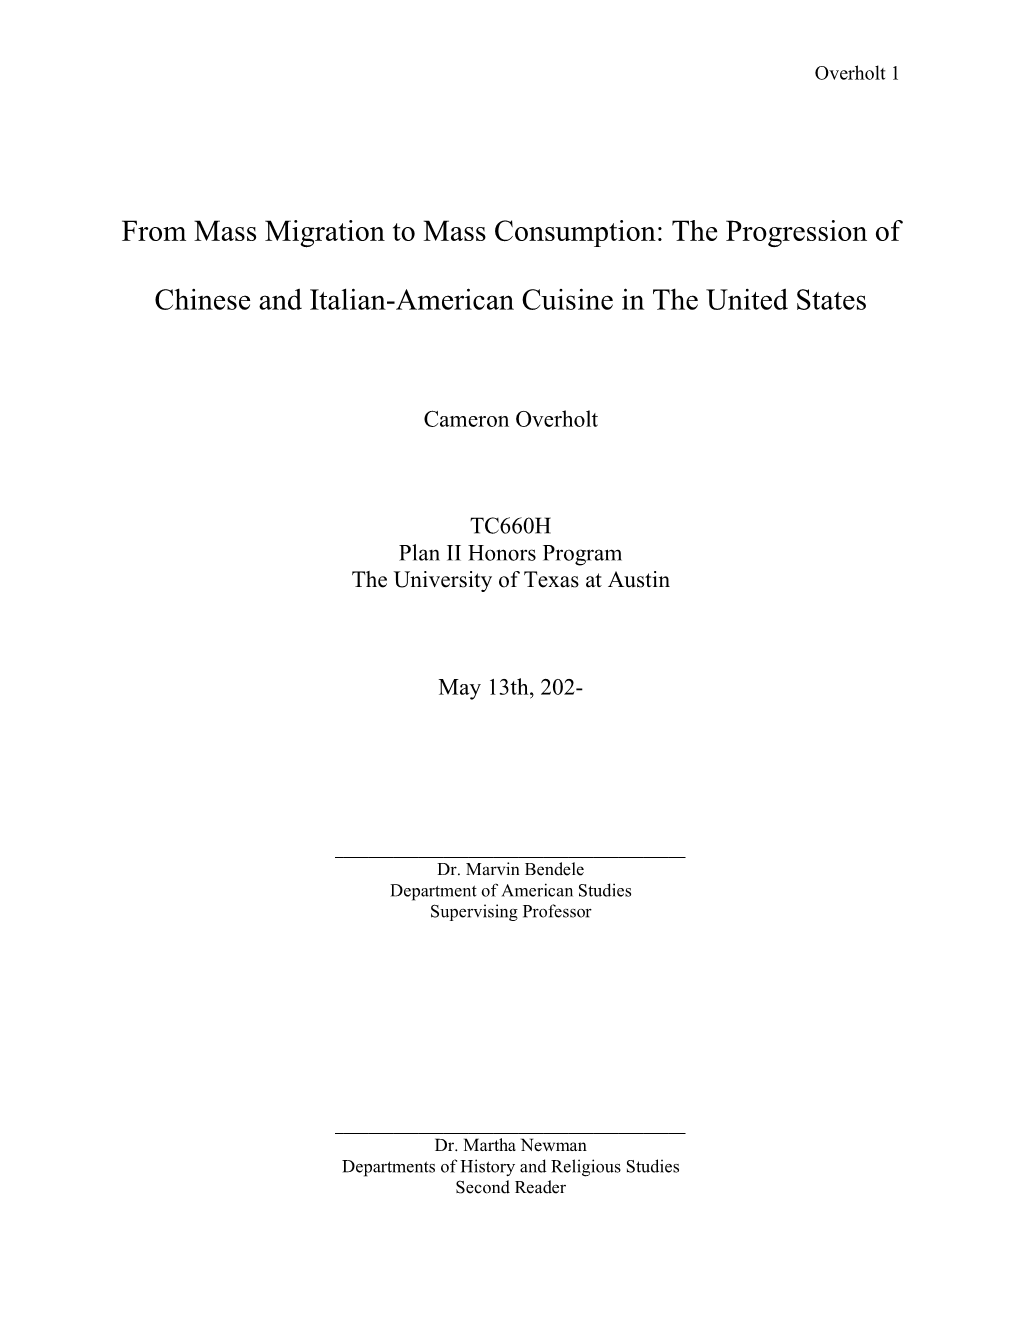 From Mass Migration to Mass Consumption: the Progression Of